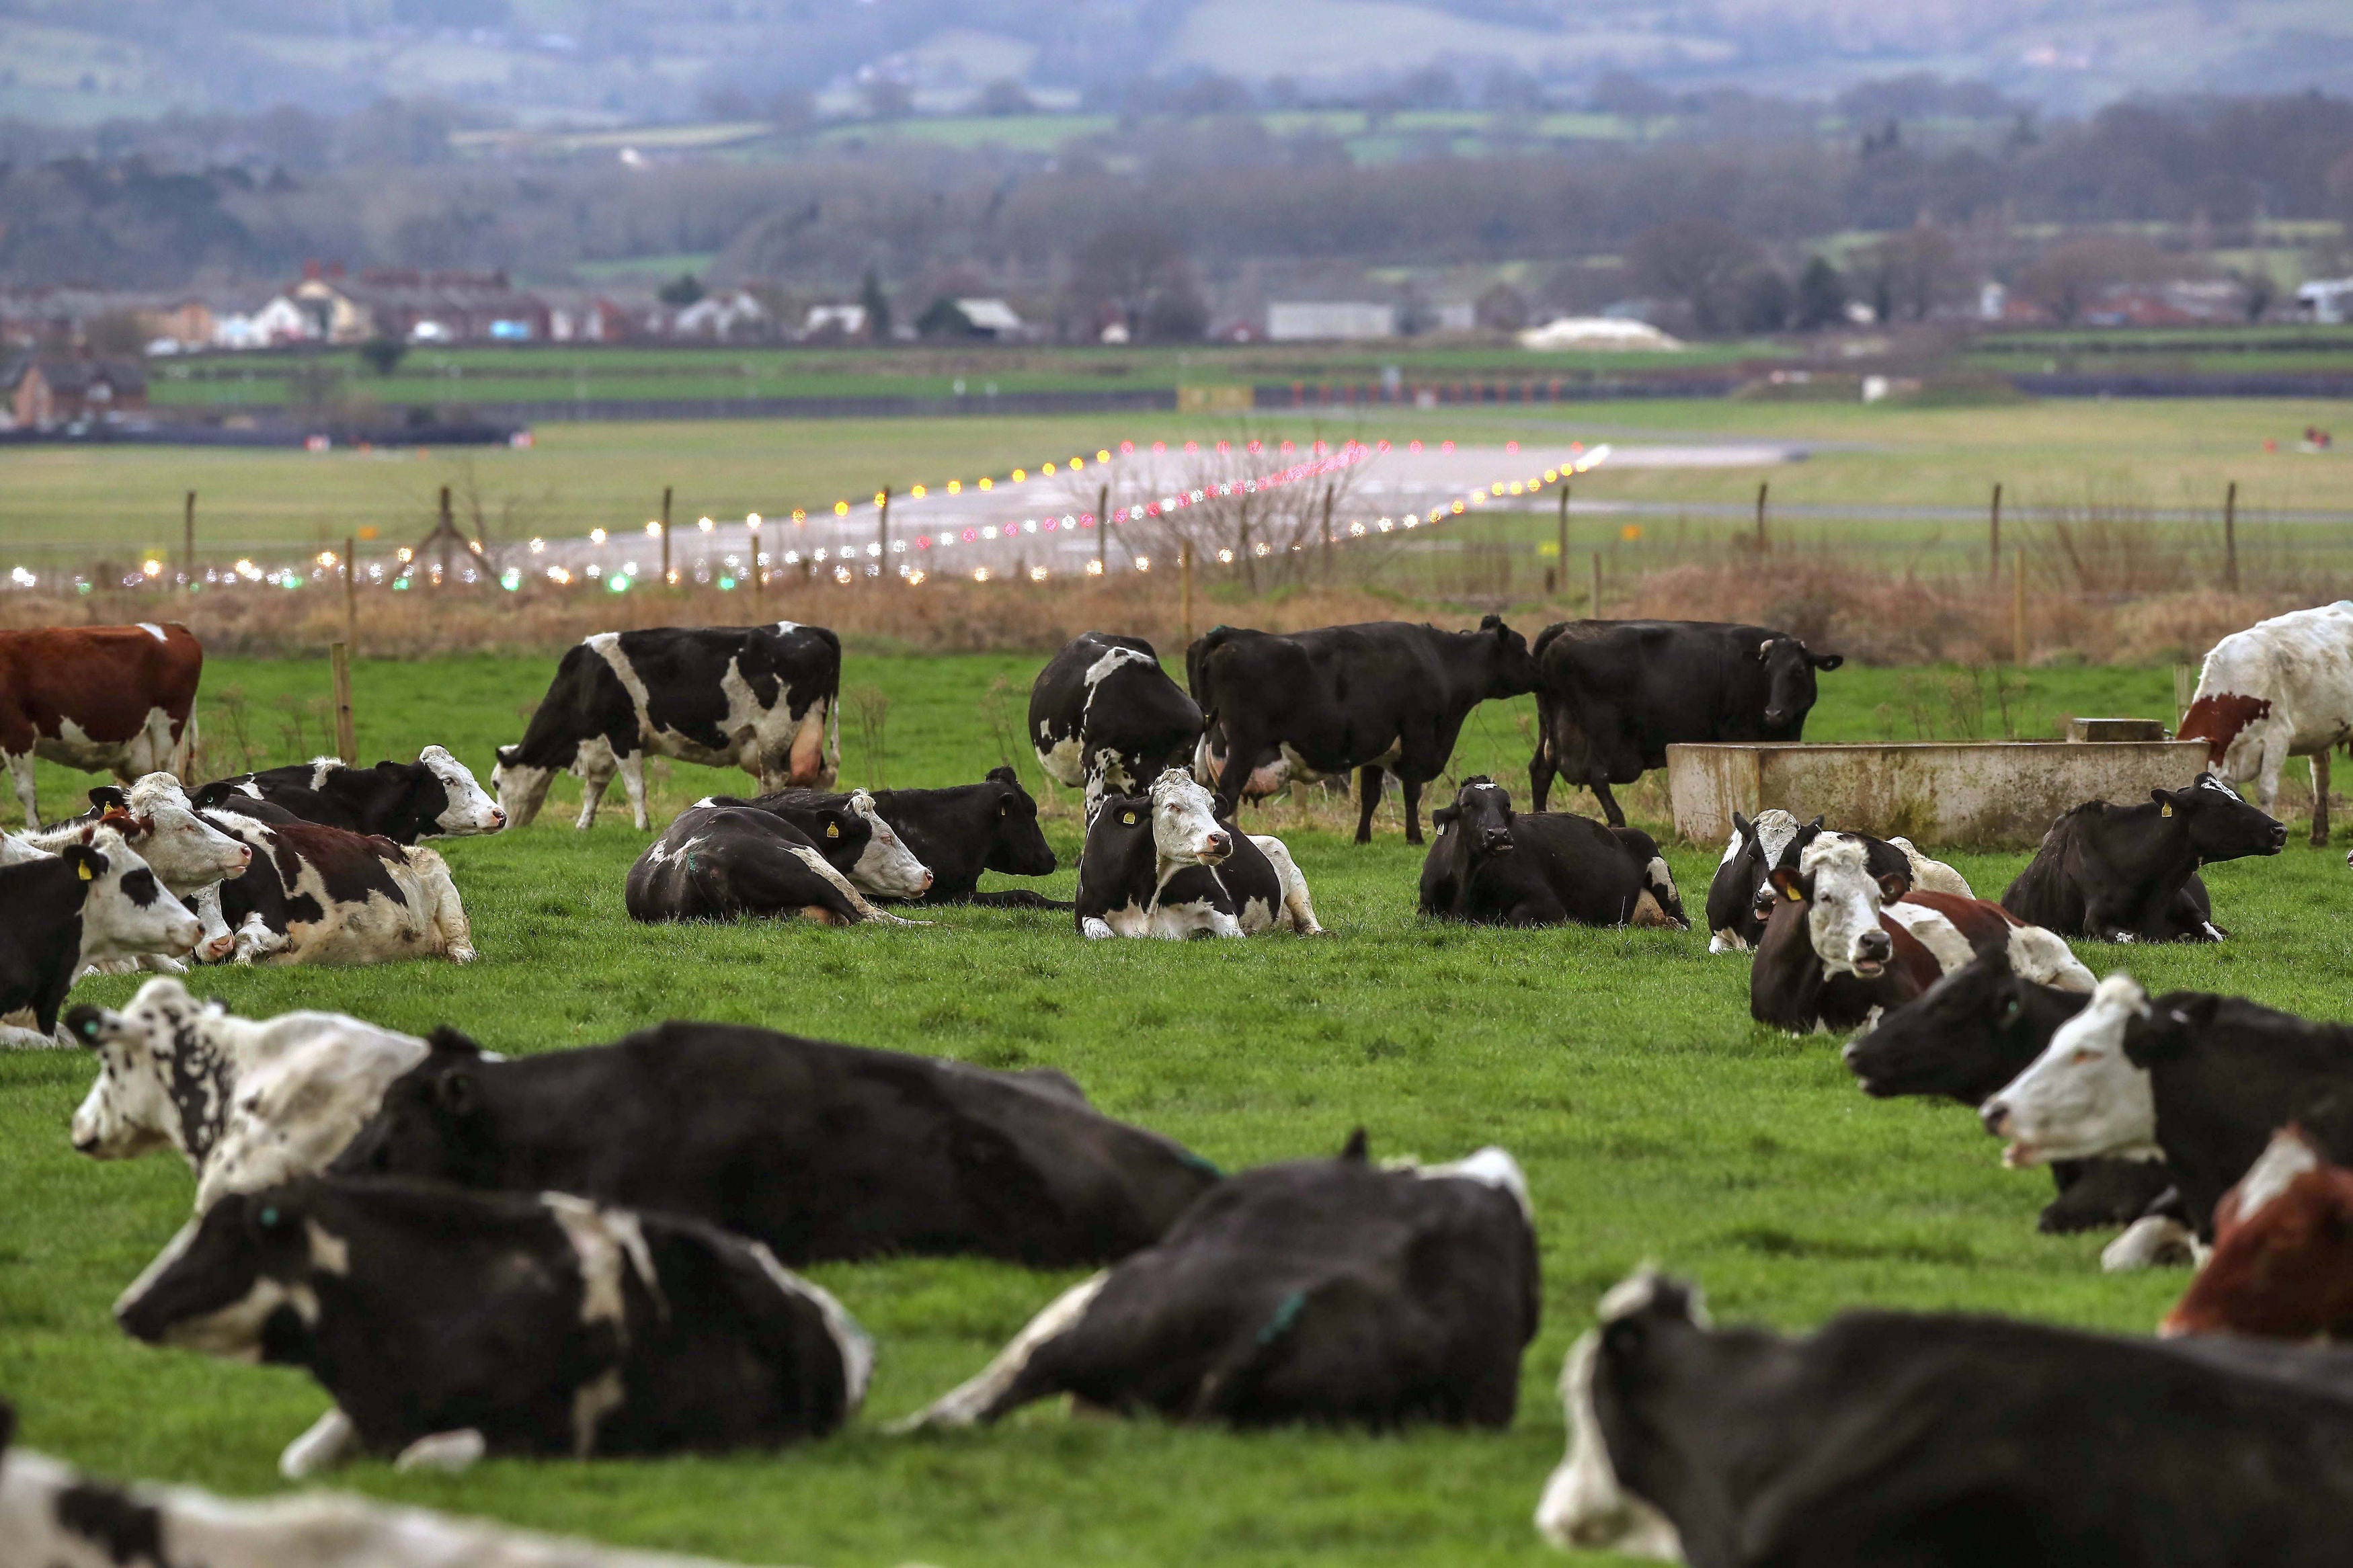 Livestock farming is a key element of British agriculture